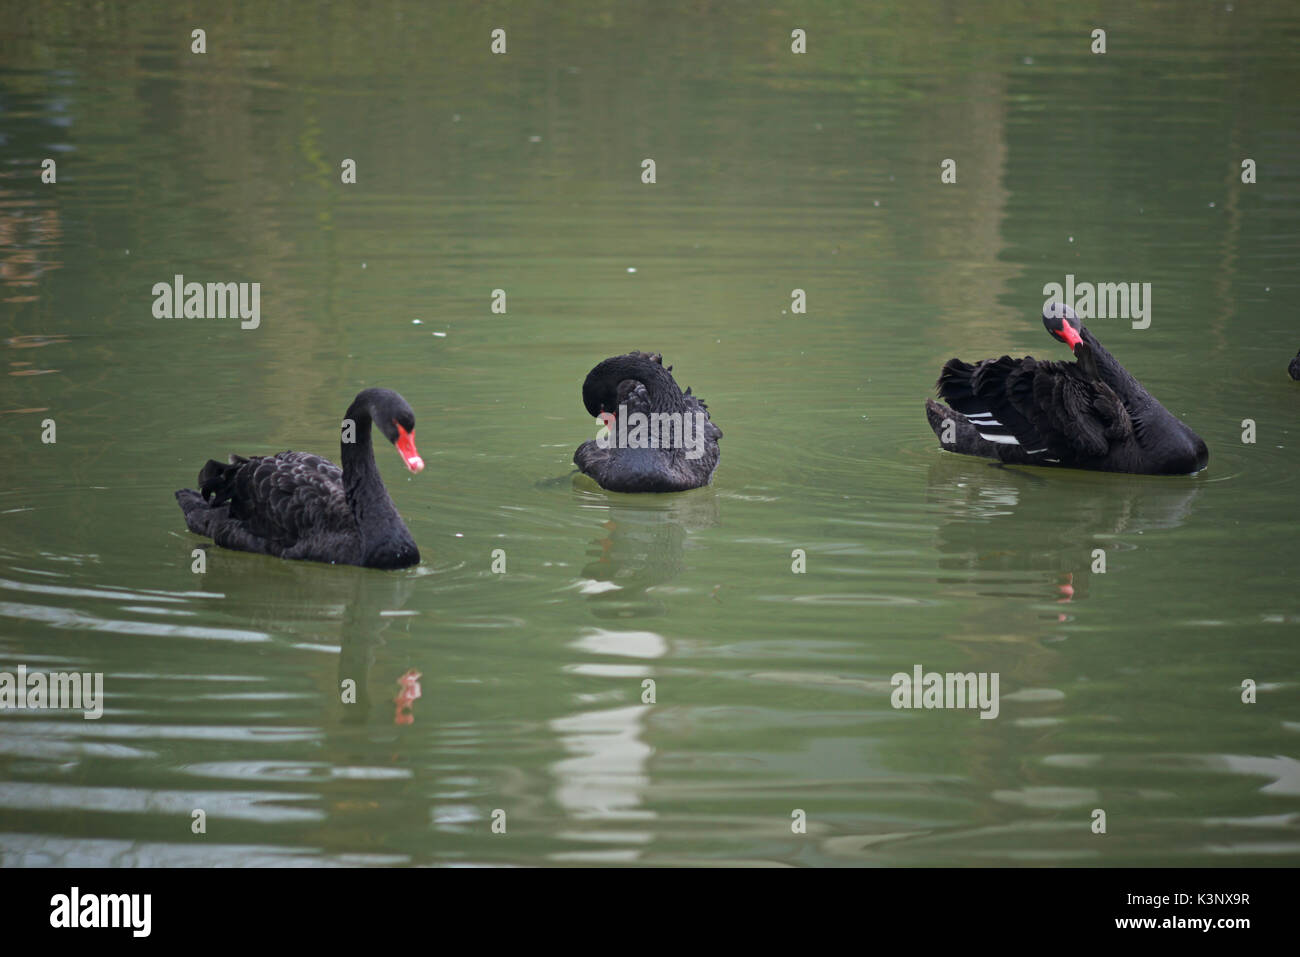 A group of Black Swans floating on the pond surface Stock Photo